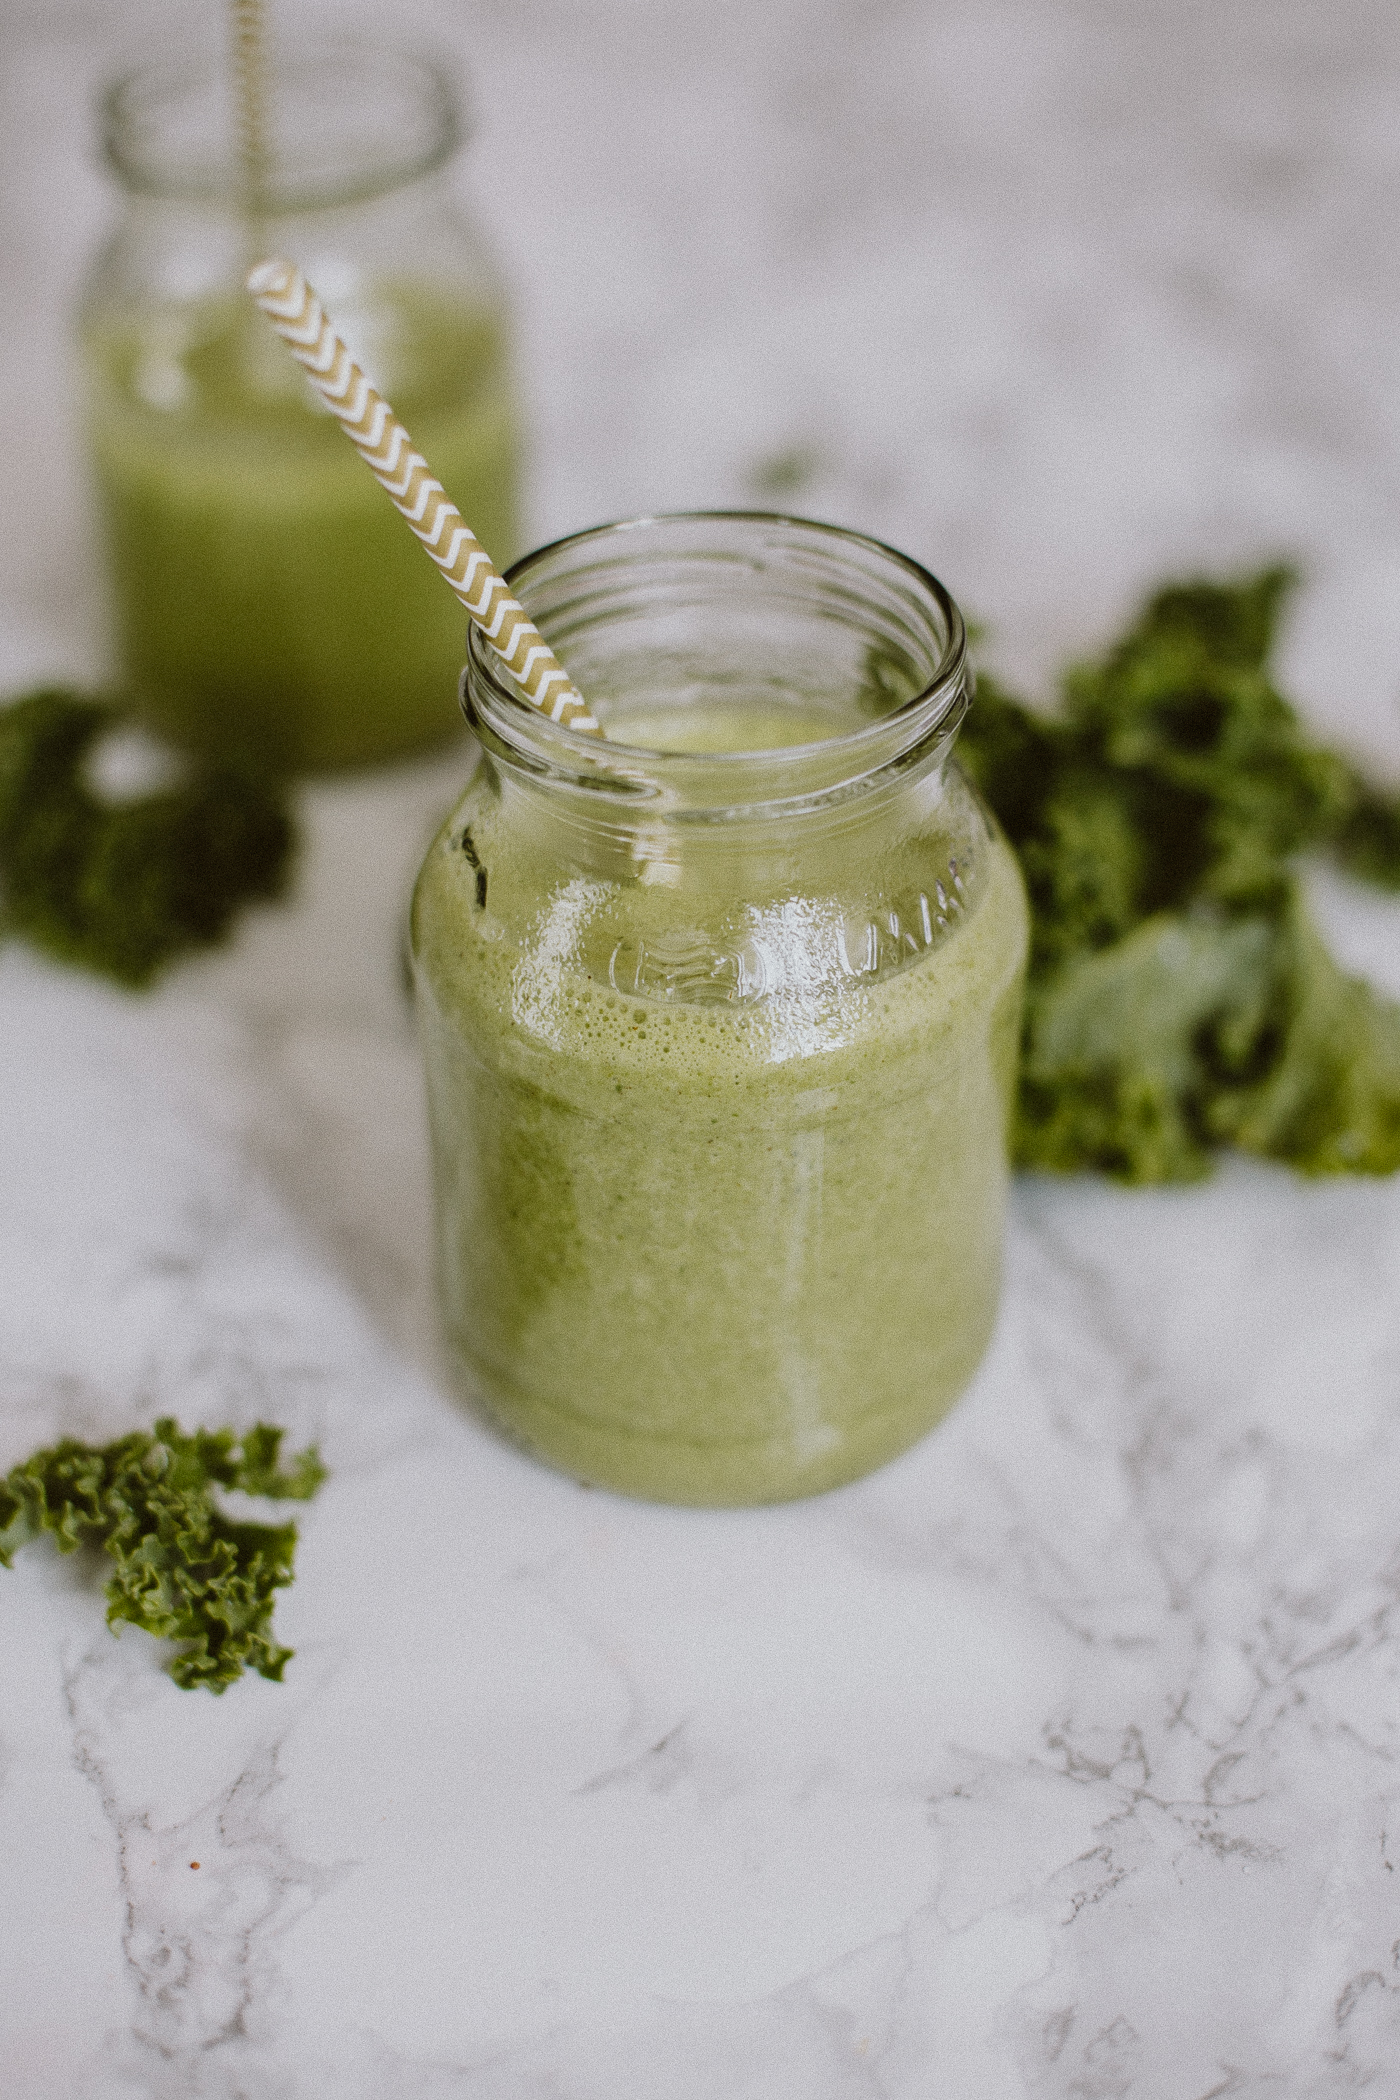 Winter Kale Smoothie with Almond Milk & Cinnamon | Love Daily Dose